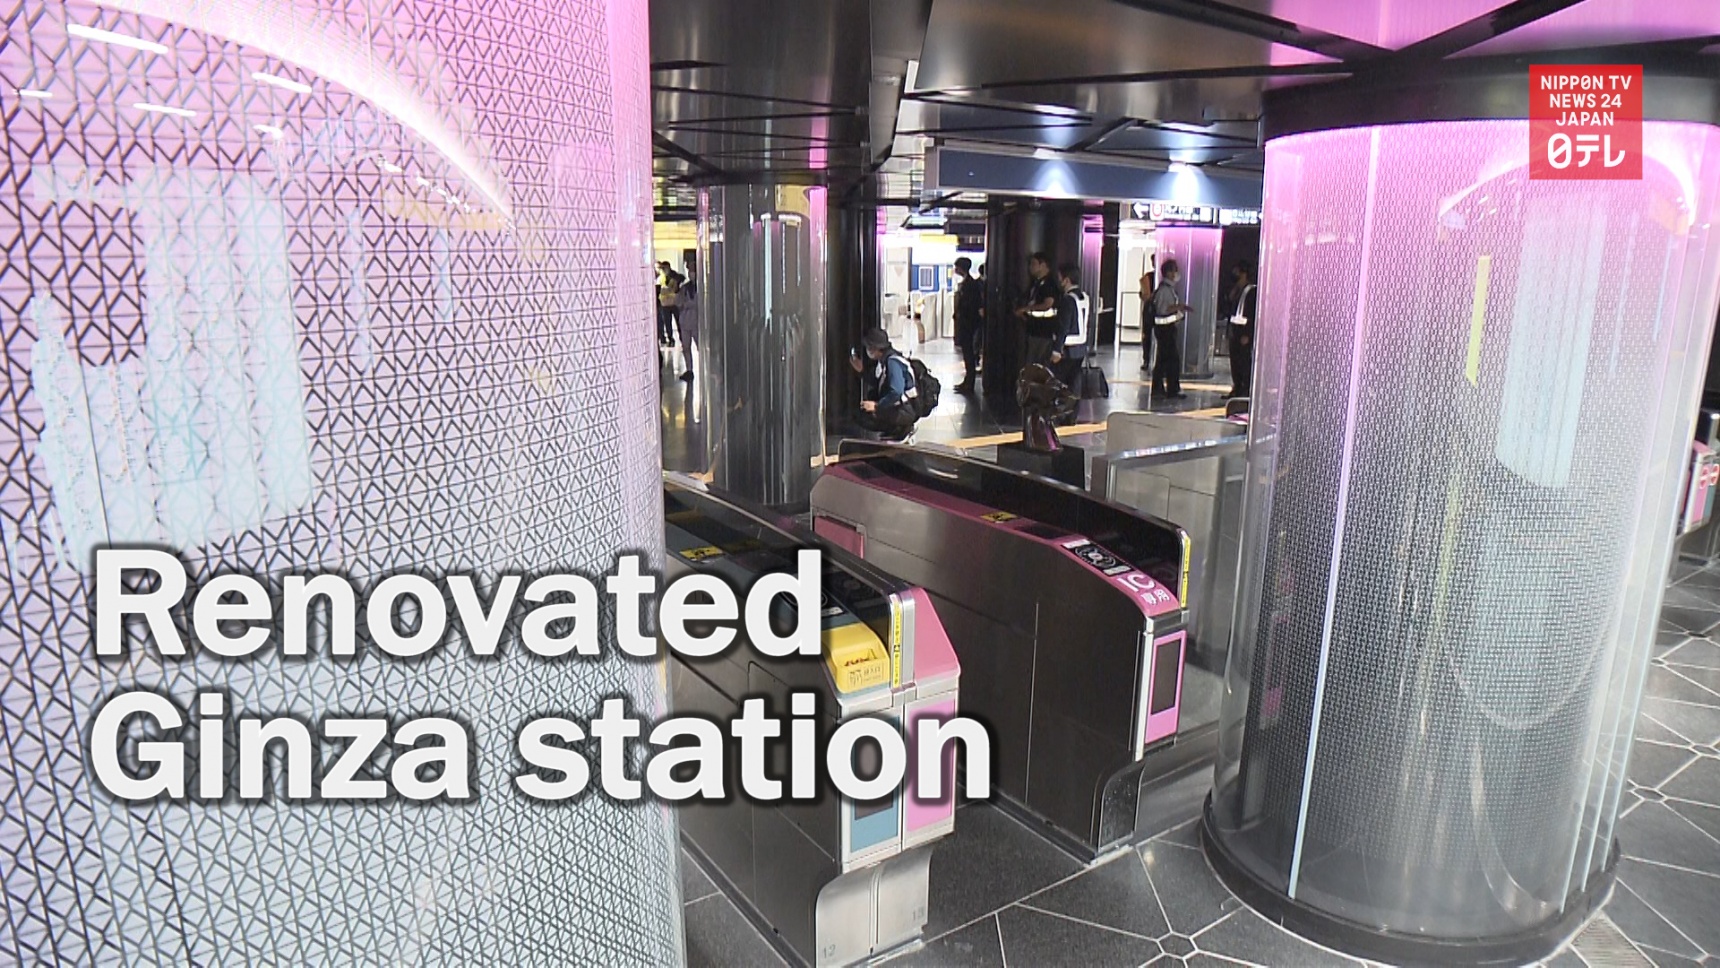 Ginza Station Renovations Finally Completed